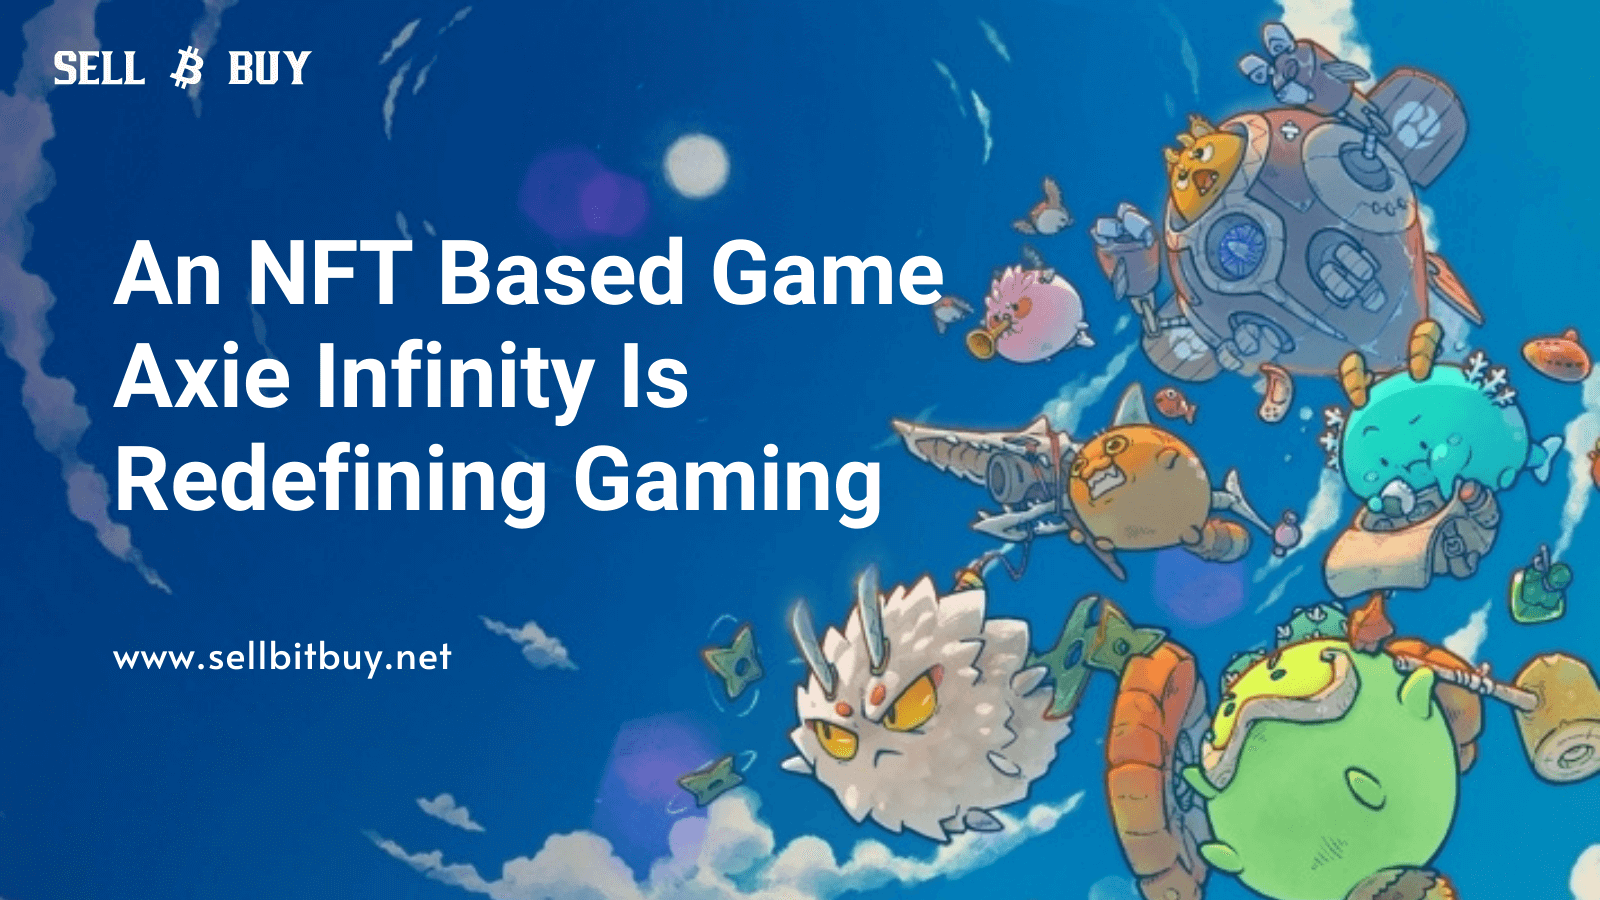 Article about An NFT Based Game Axie Infinity Is Redefining Gaming